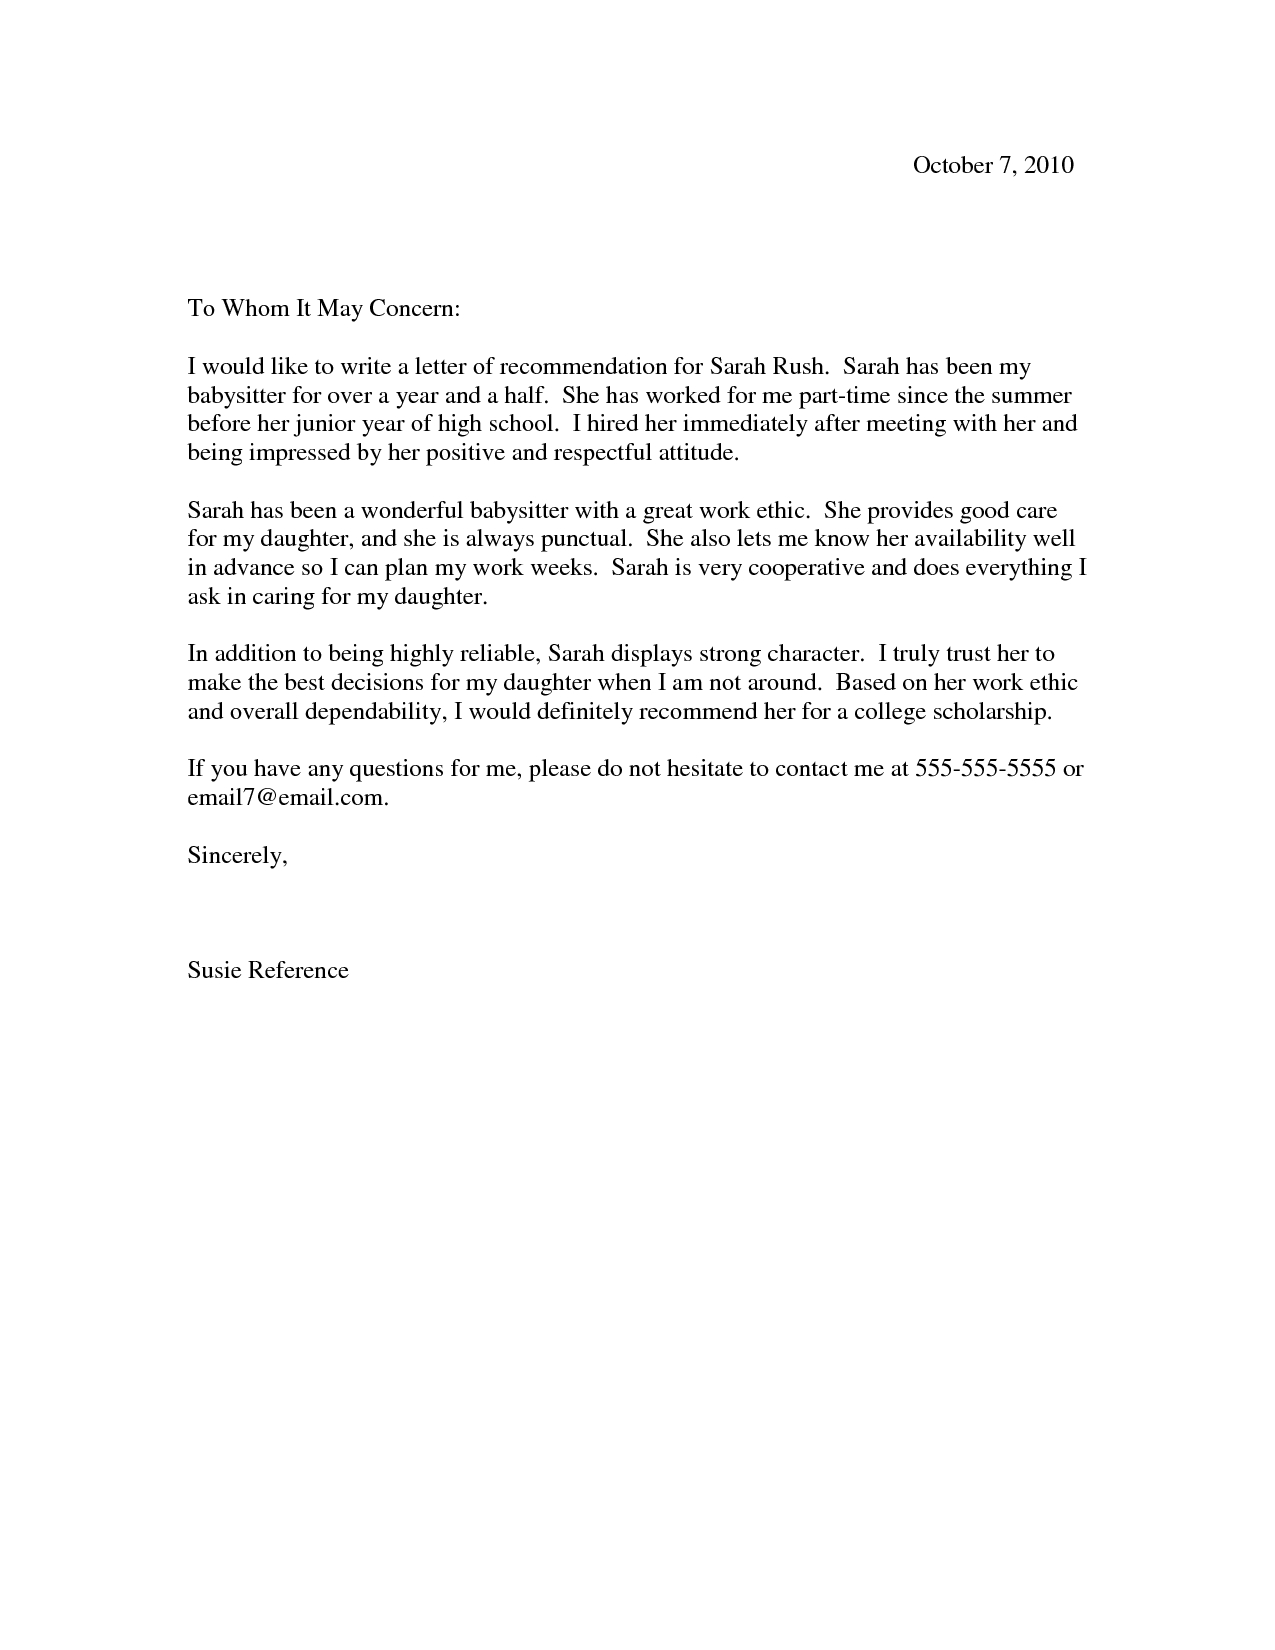 College Recommendation Letter Sample College with size 1275 X 1650